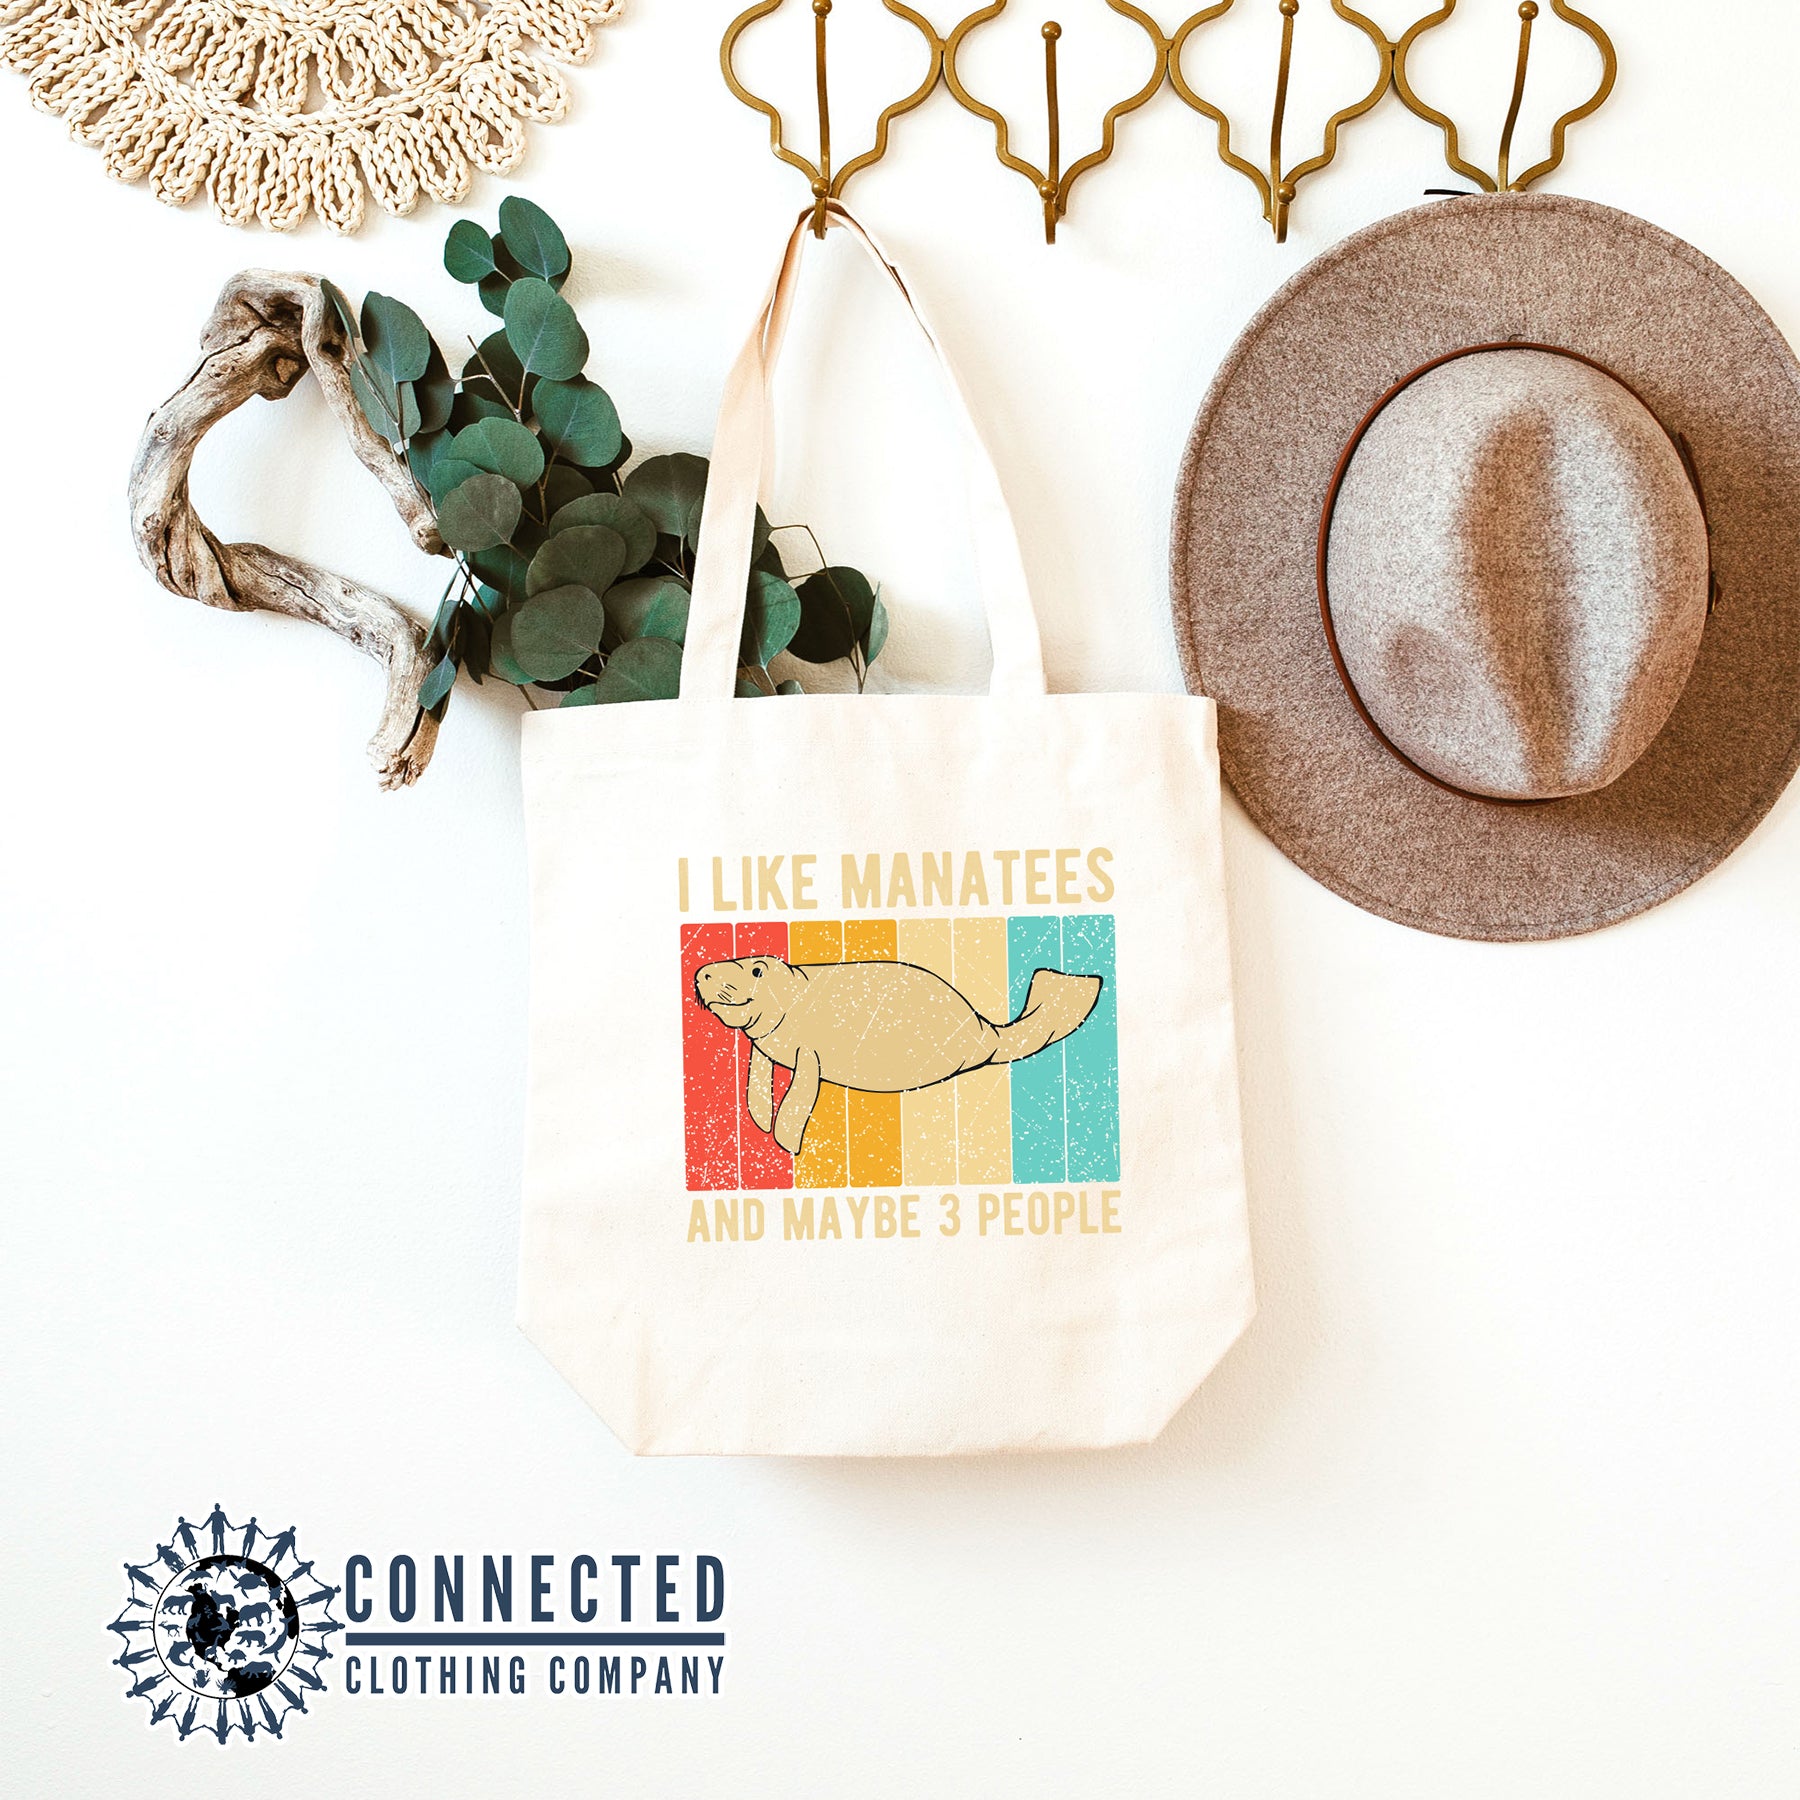 I Like Manatees Tote Bag - Connected Clothing Company - 10% of proceeds donated to ocean conservation